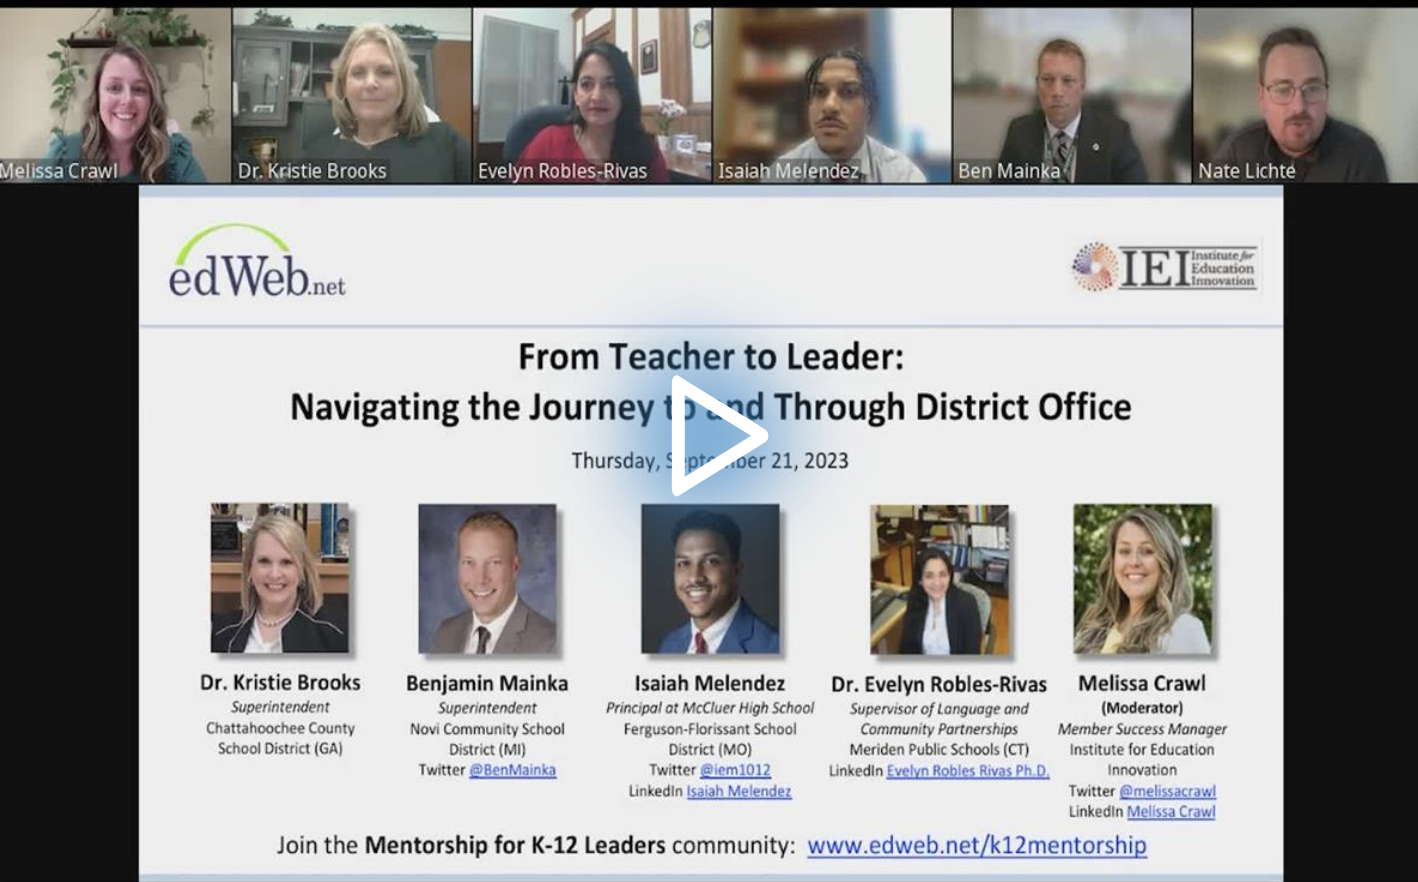 From Teacher to Leader: Navigating the Journey to and Through District Office edLeader Panel recording screenshot